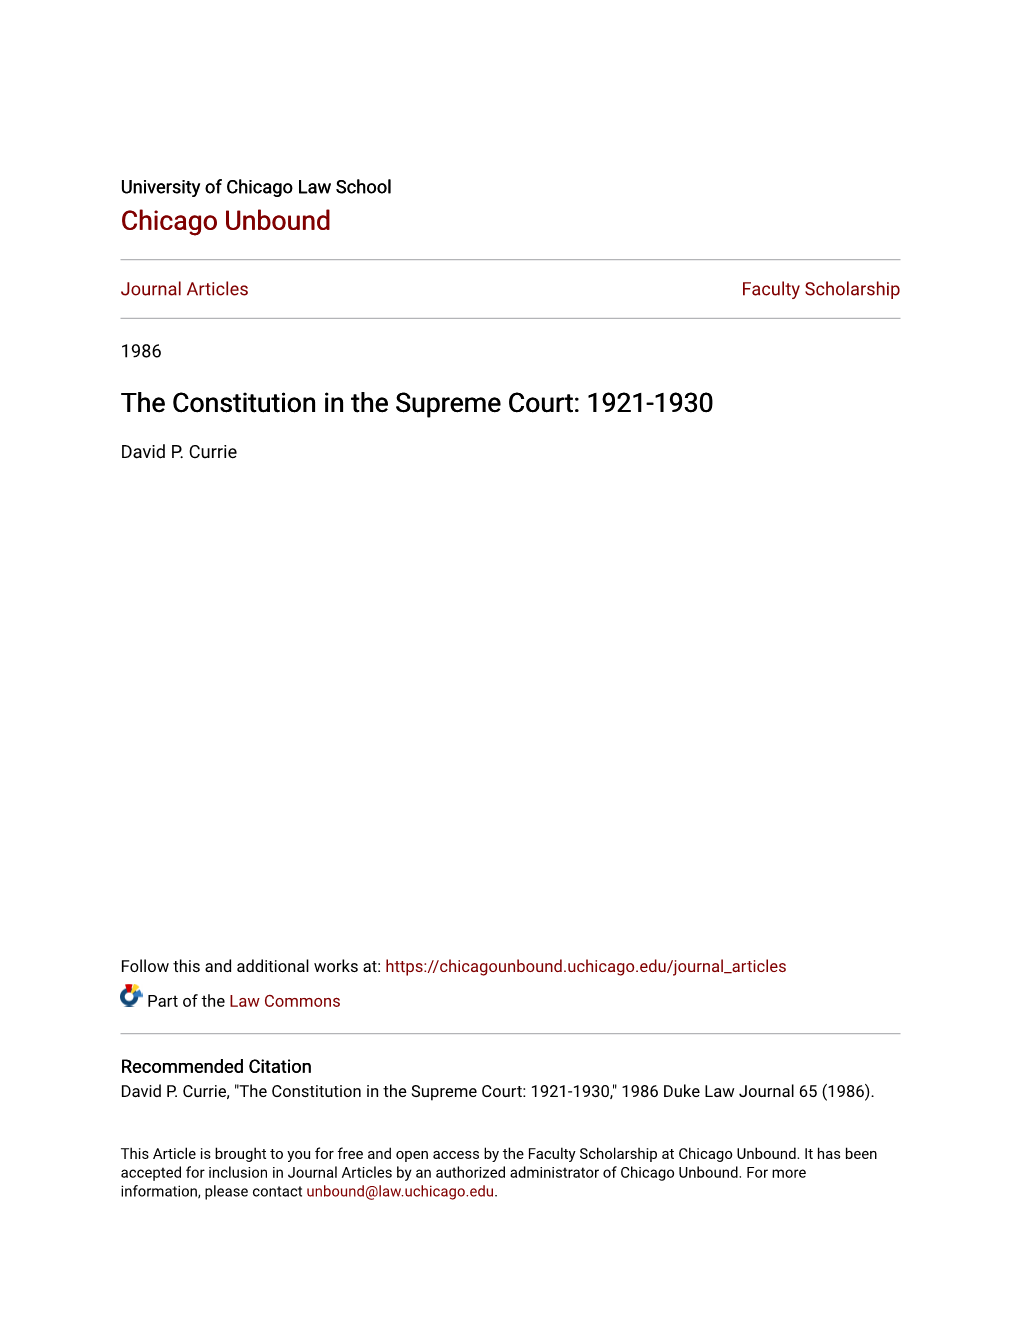 The Constitution in the Supreme Court: 1921-1930